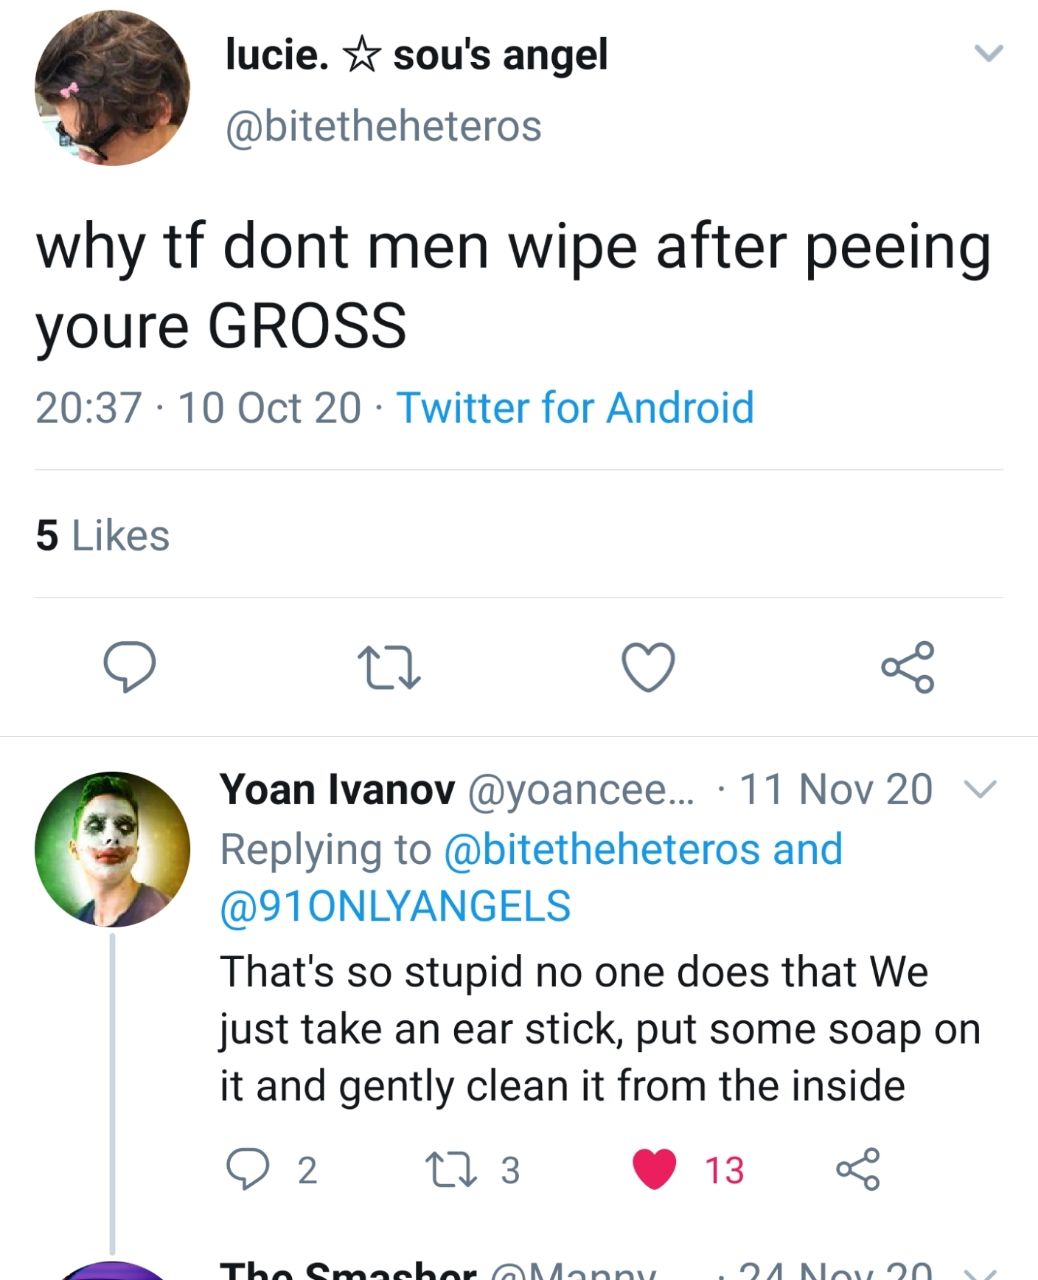 document - lucie. souls angel why tf dont men wipe after peeing youre Gross 10 Oct 20 Twitter for Android 5 8 Yoan Ivanov ... 11 Nov 20 V and That's so stupid no one does that we just take an ear stick, put some soap on it and gently clean it from the ins